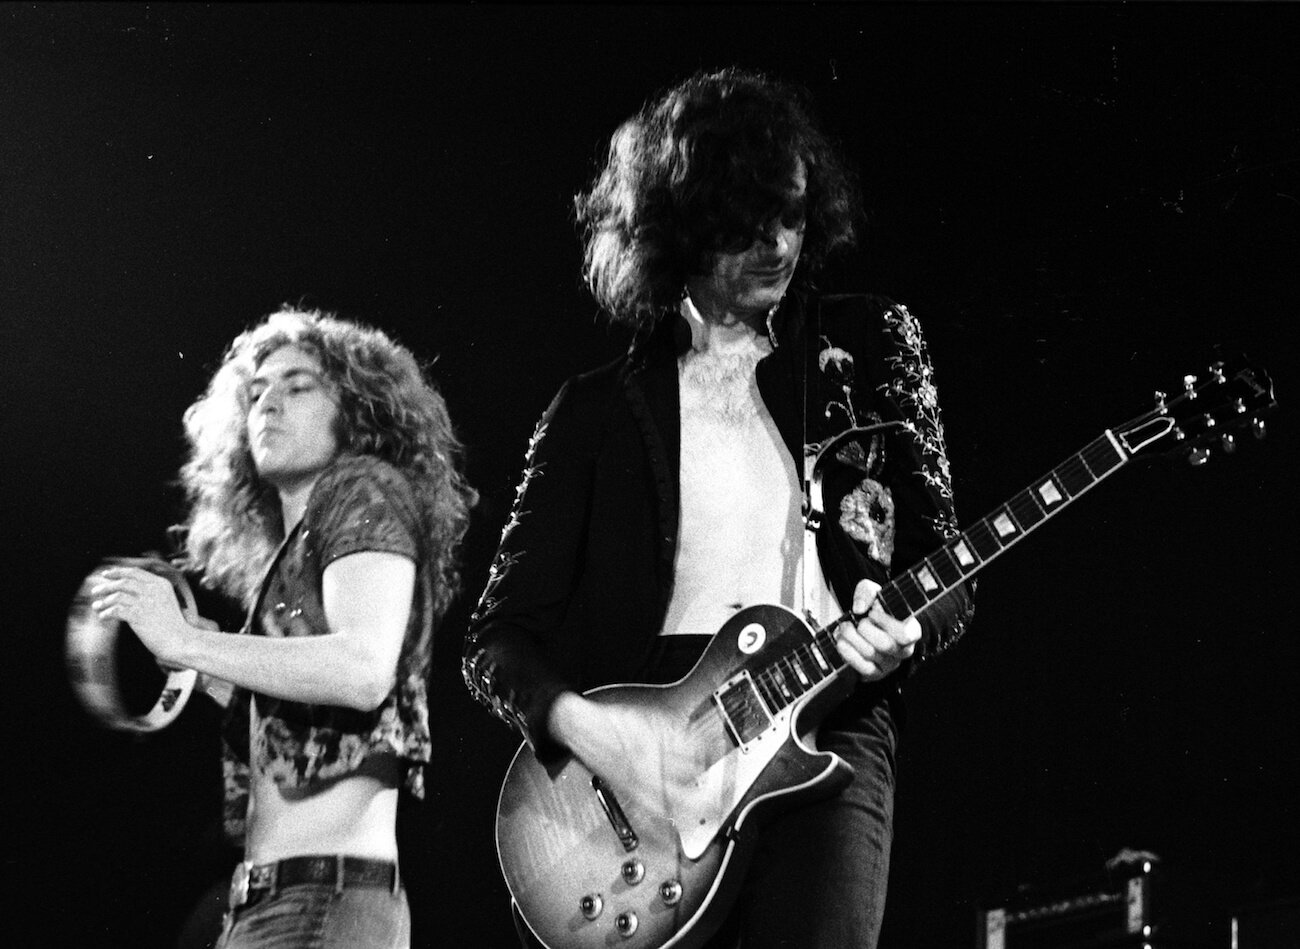 Led Zeppelin performing at the Forum in 1973.